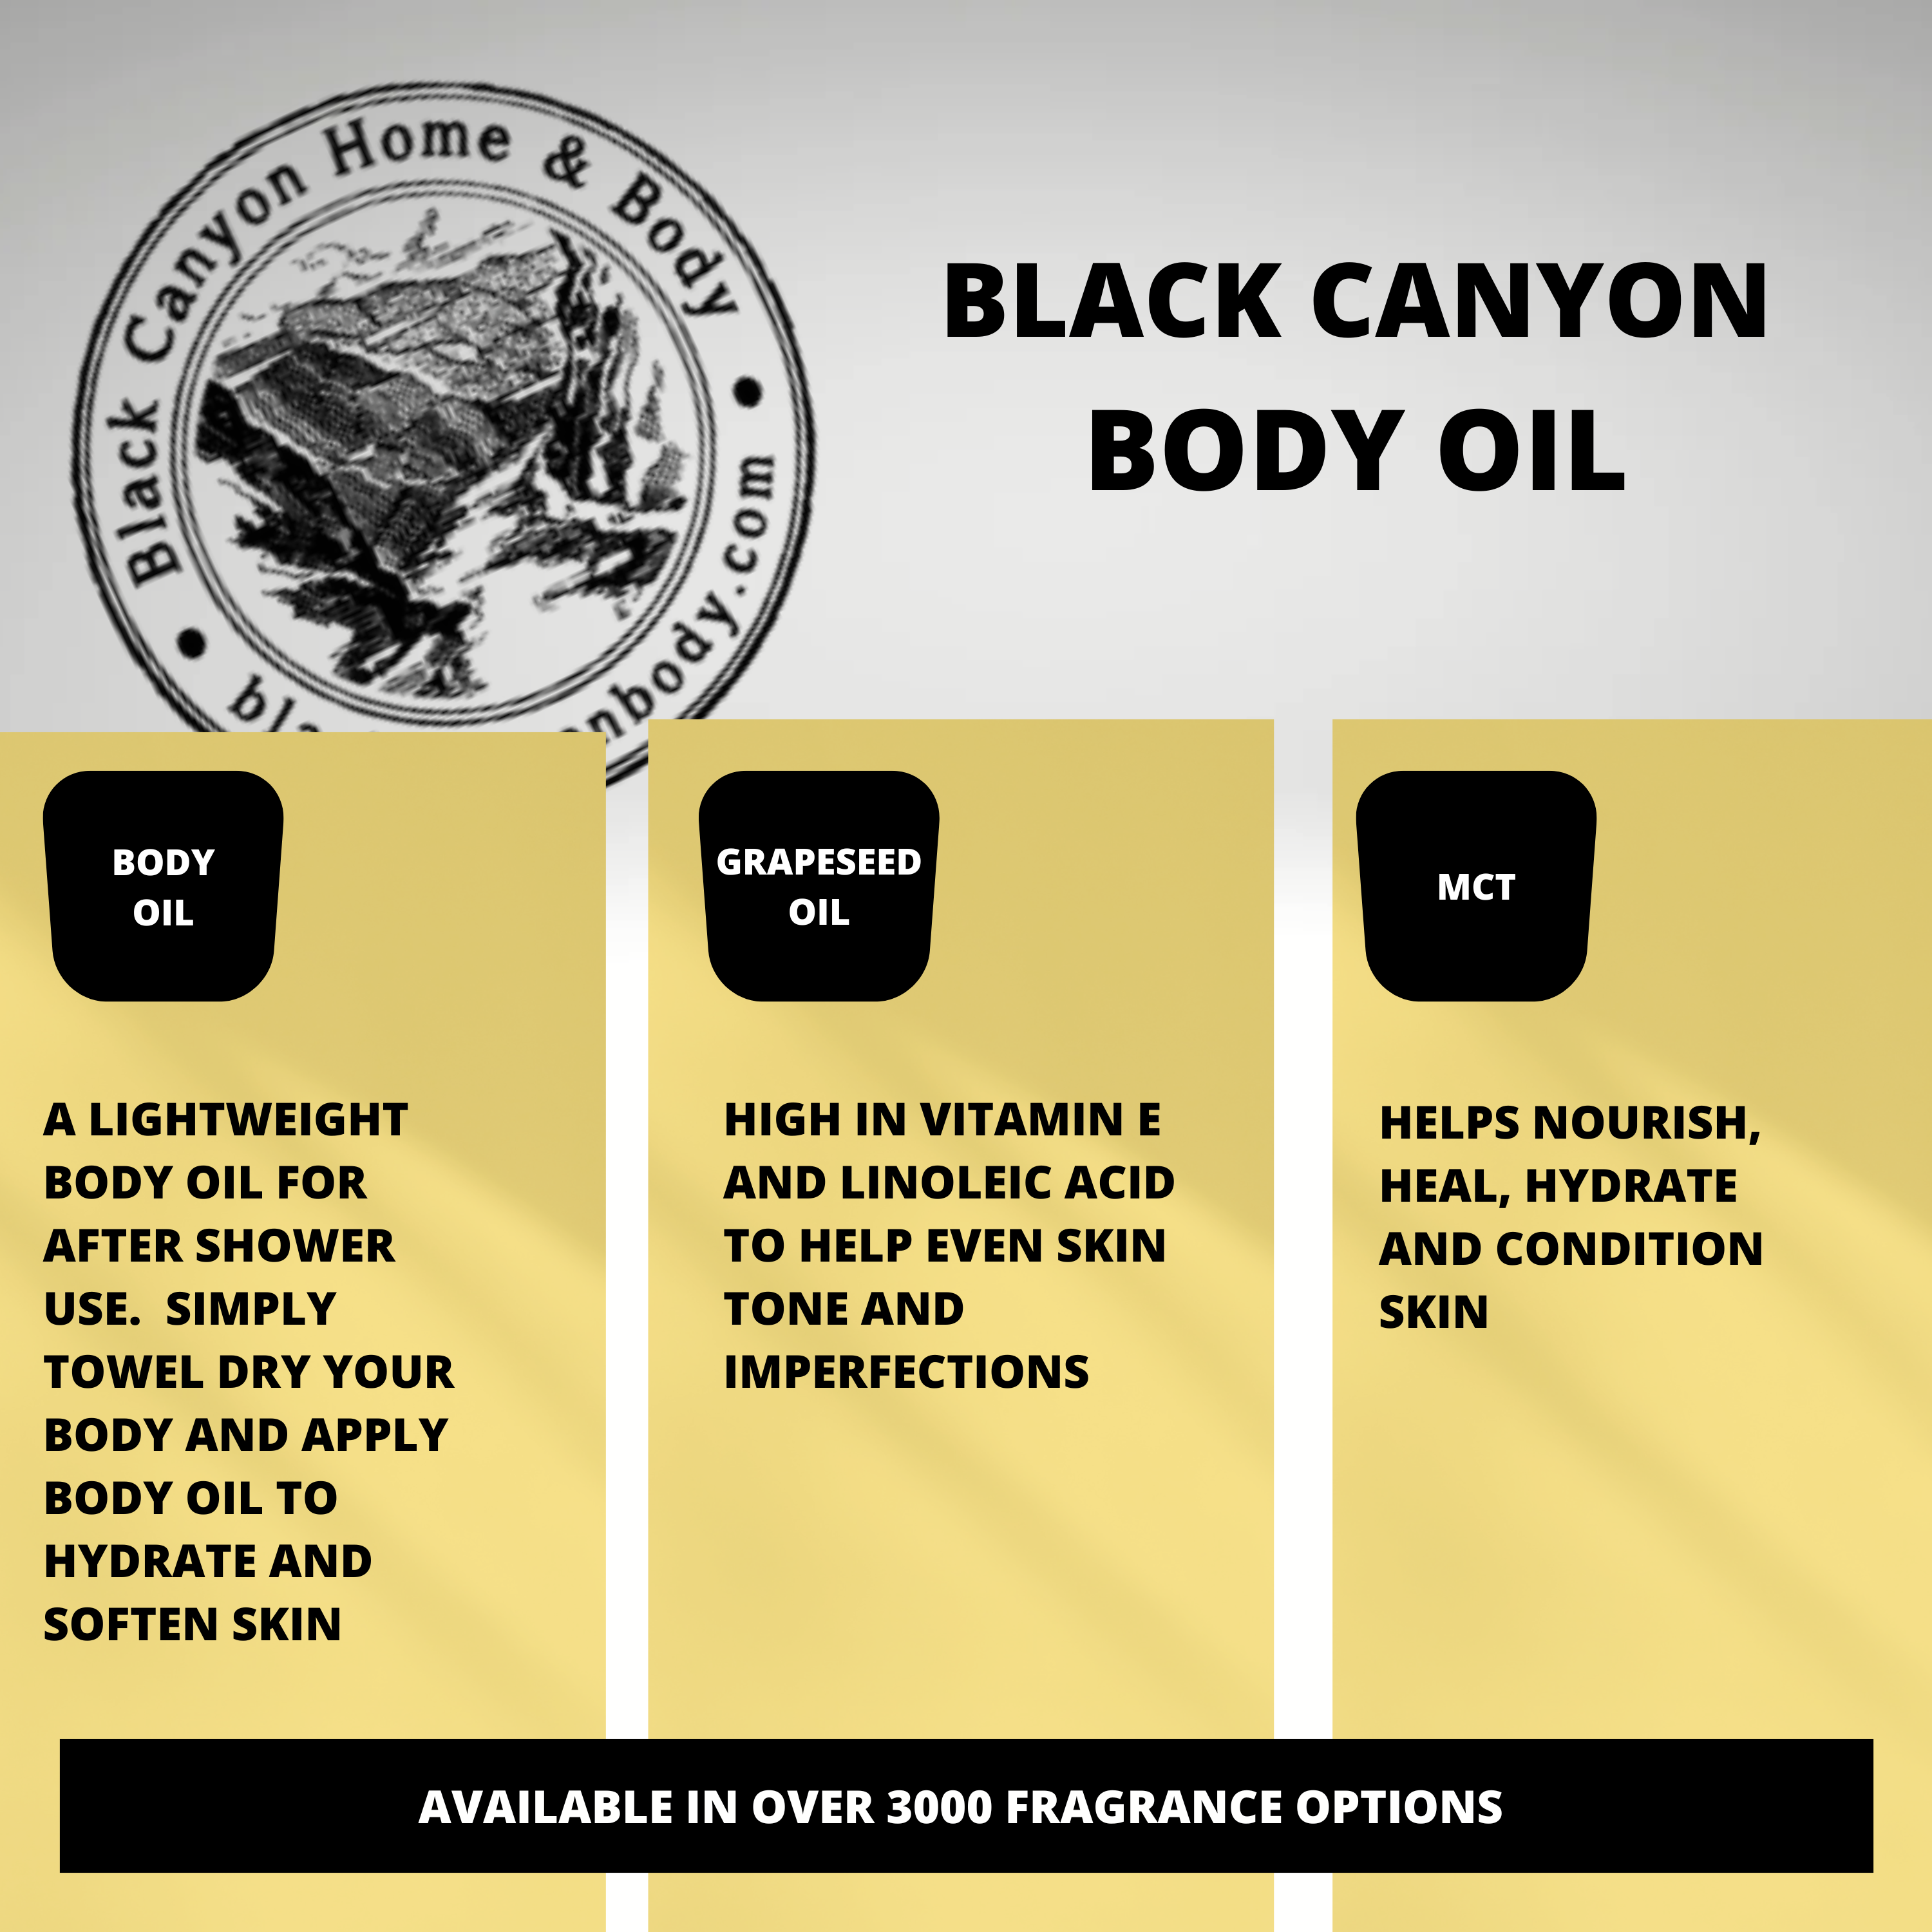 Black Canyon Black Licorice Scented Body Oil